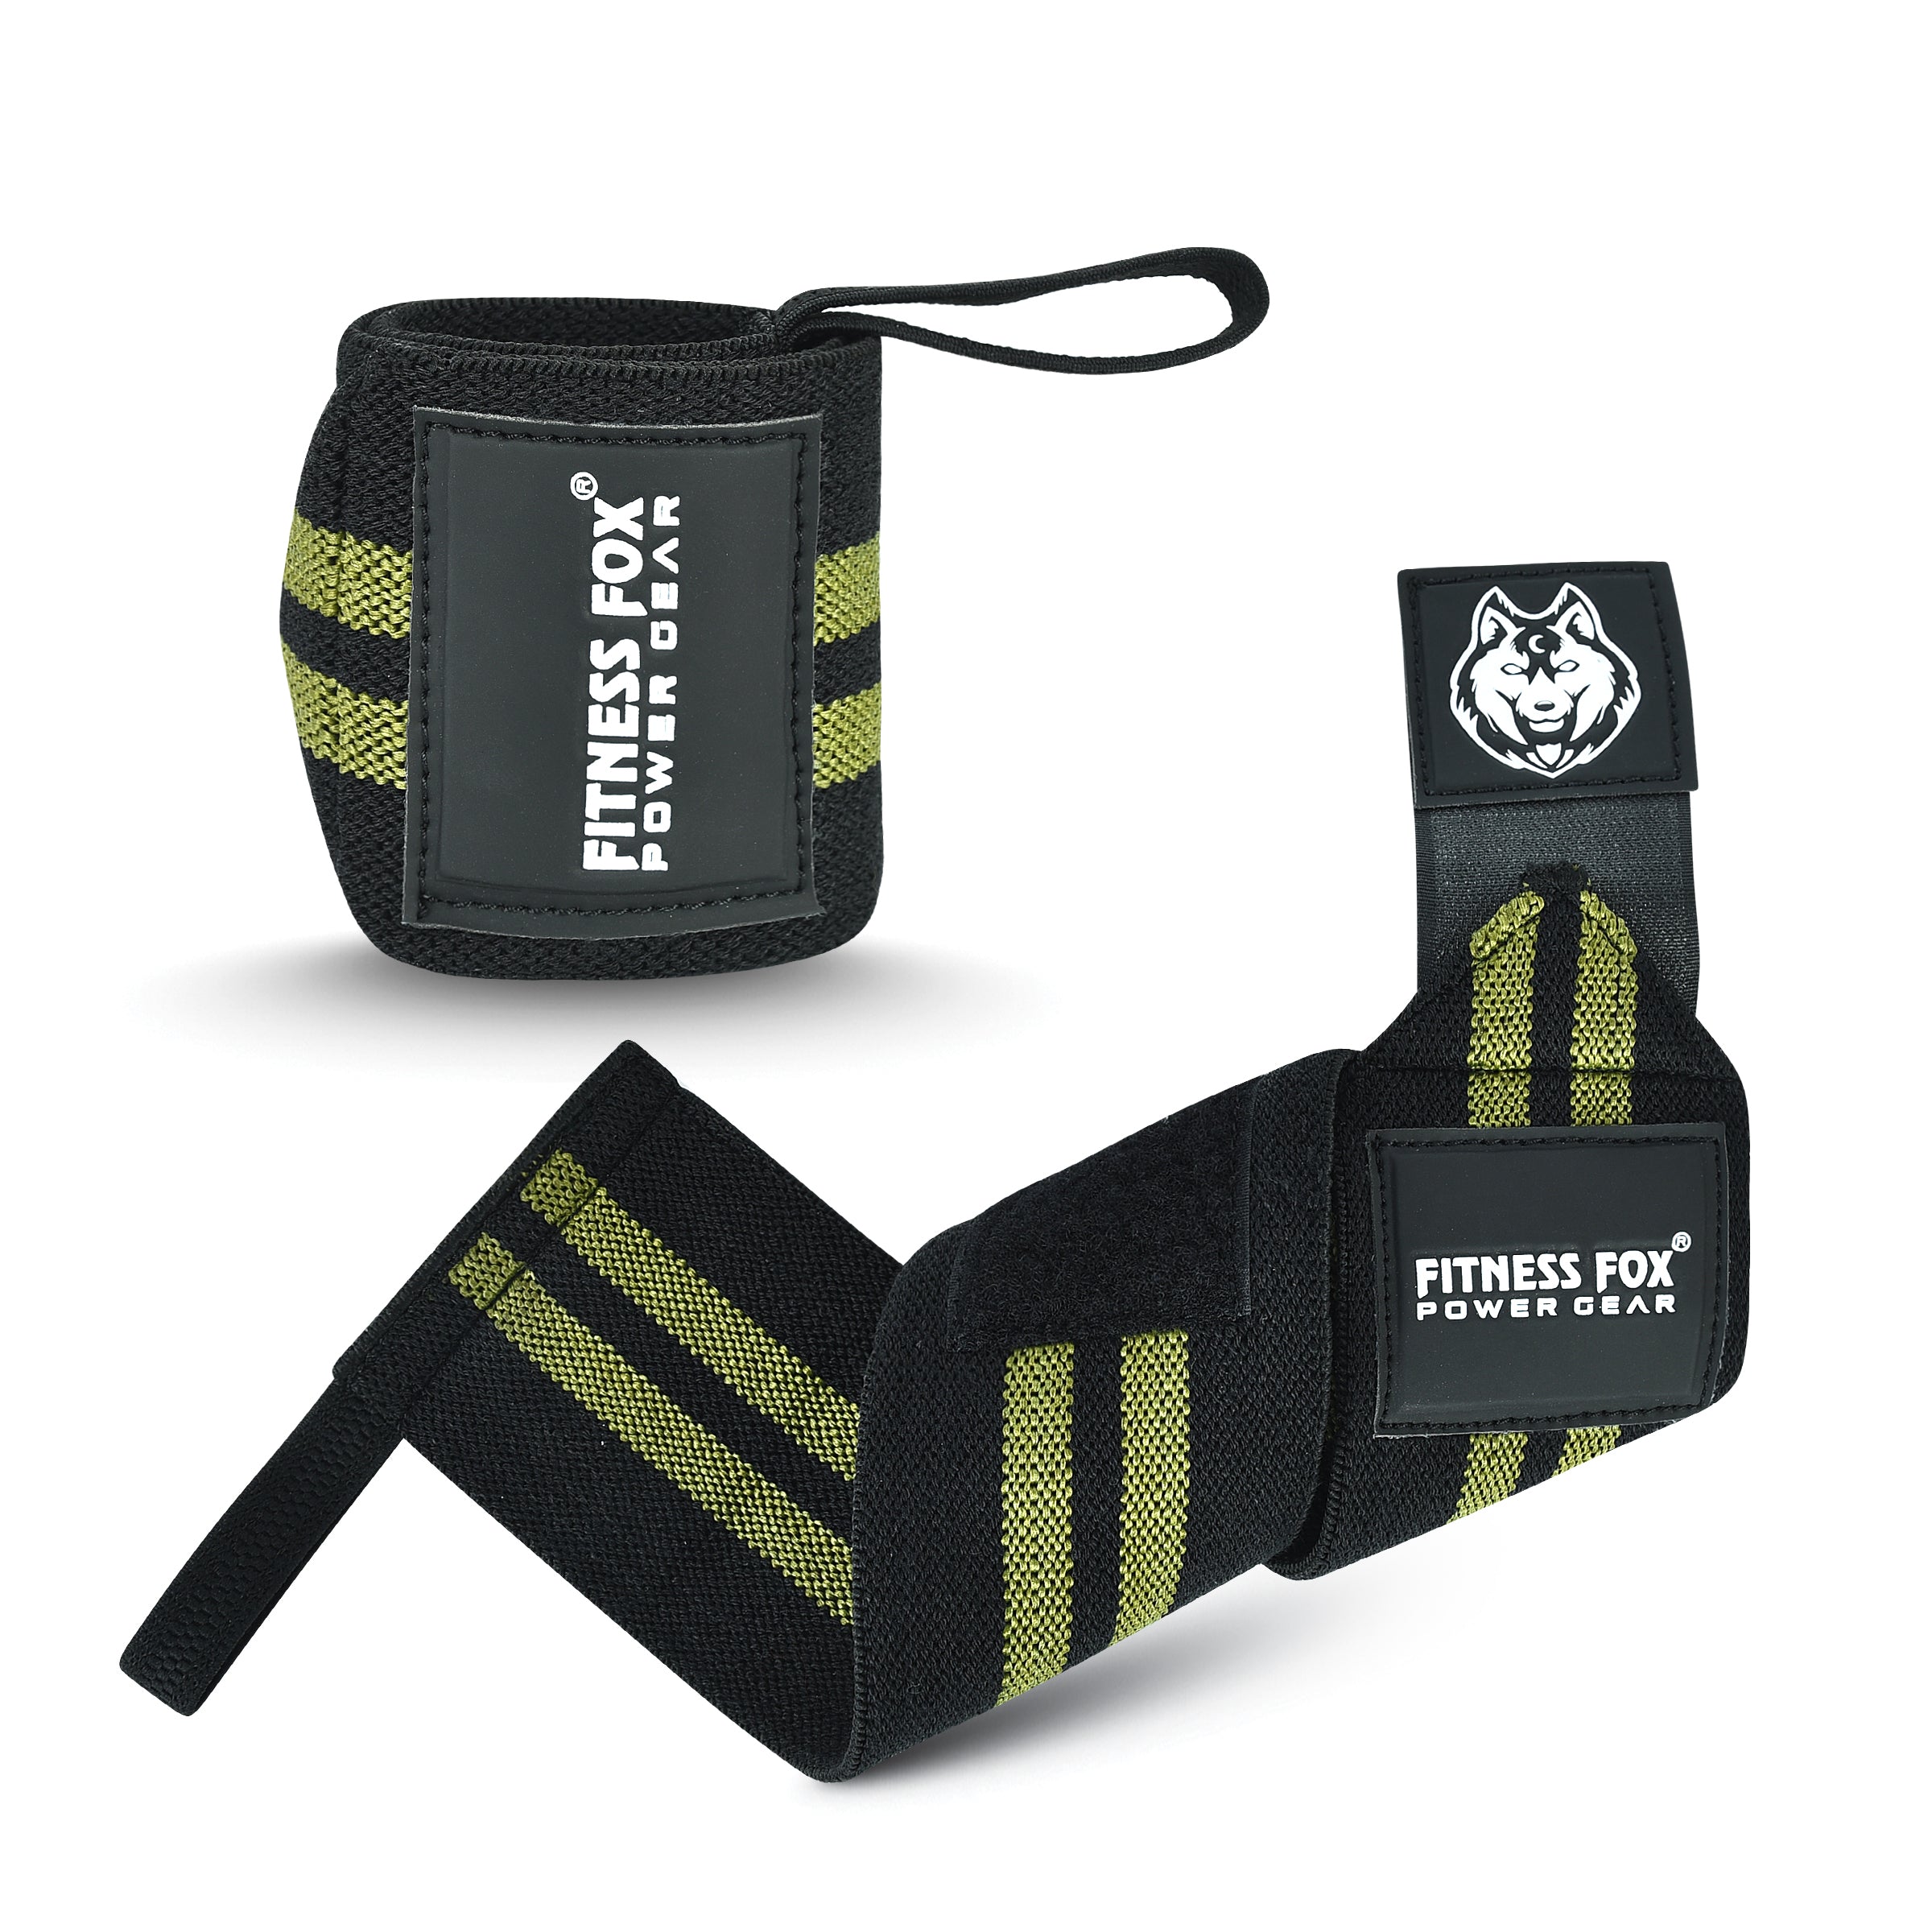 FITNESS FOX 18" Inch Olive Wrist Wraps(Pair) for Weightlifting